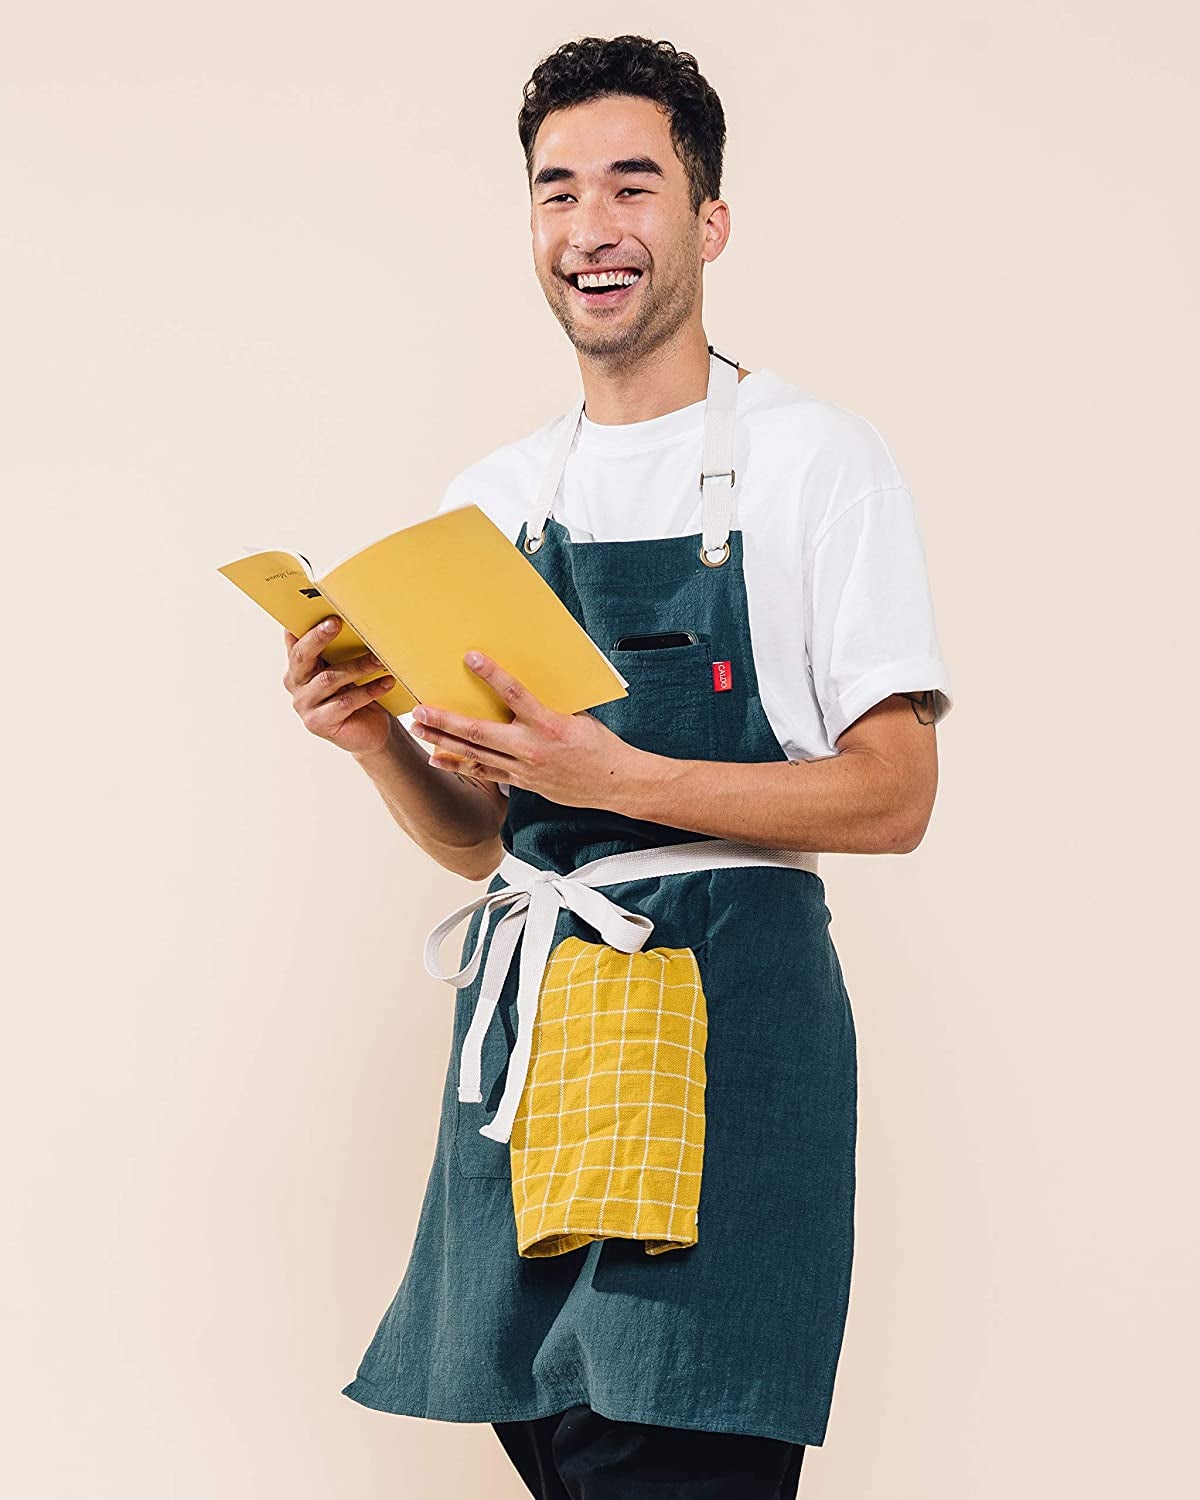 model smiling while wearing apron and holding dish towel and recipe book